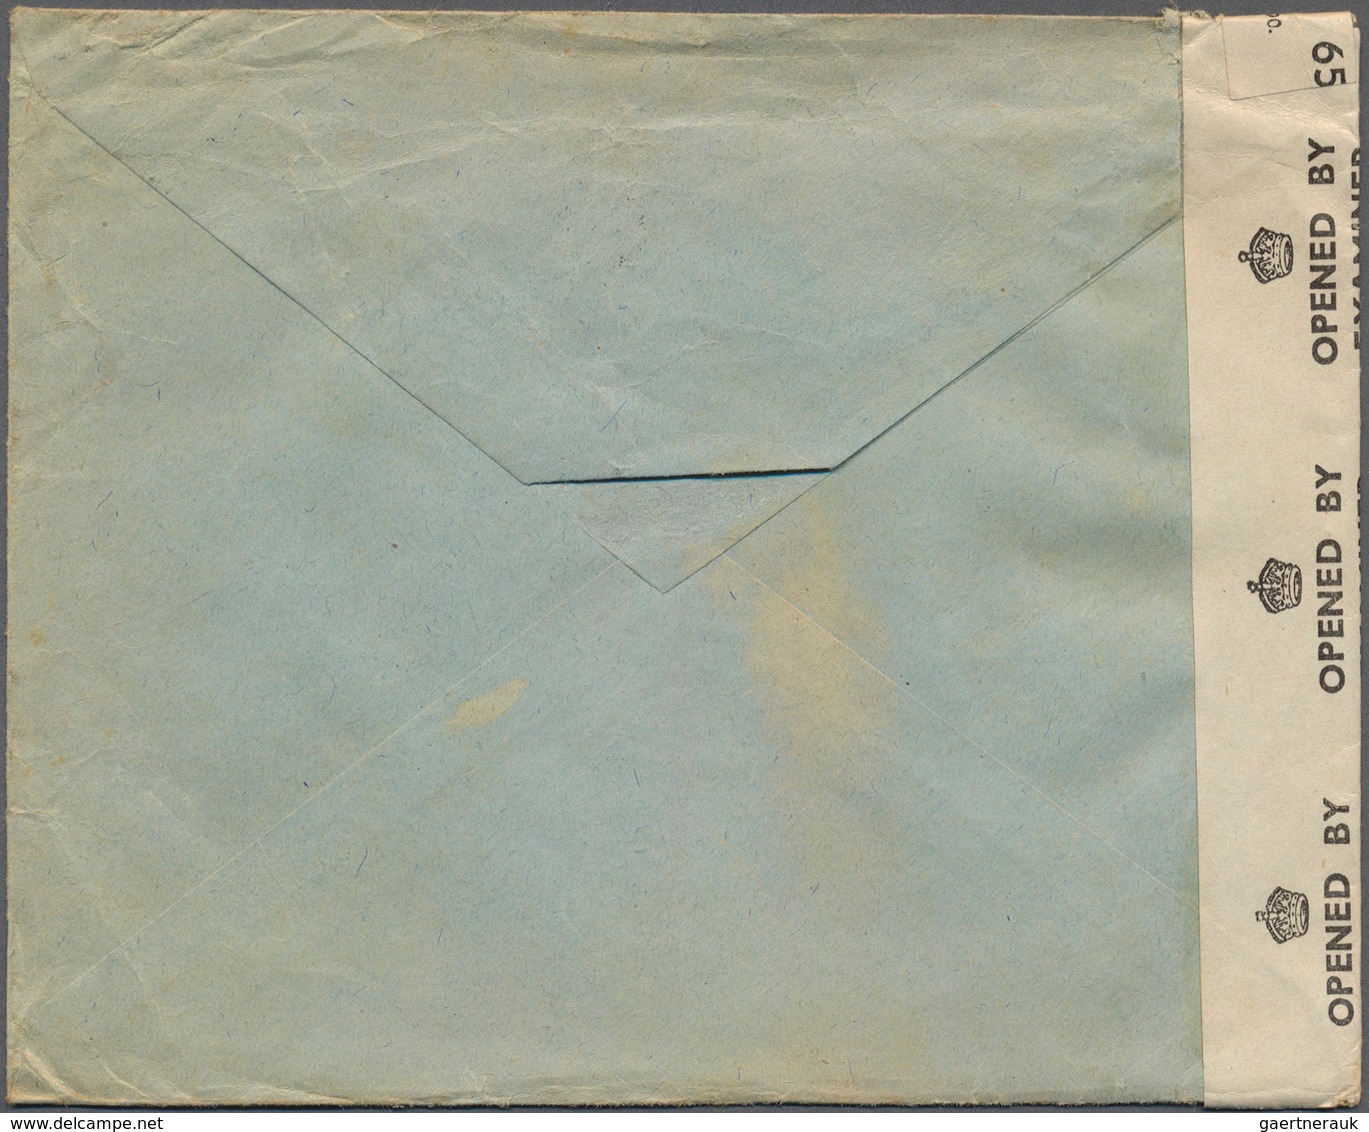 Tanger - Britische Post: 1944. Envelope Addressed To The 'Free French National Liberation Committee, - Morocco Agencies / Tangier (...-1958)